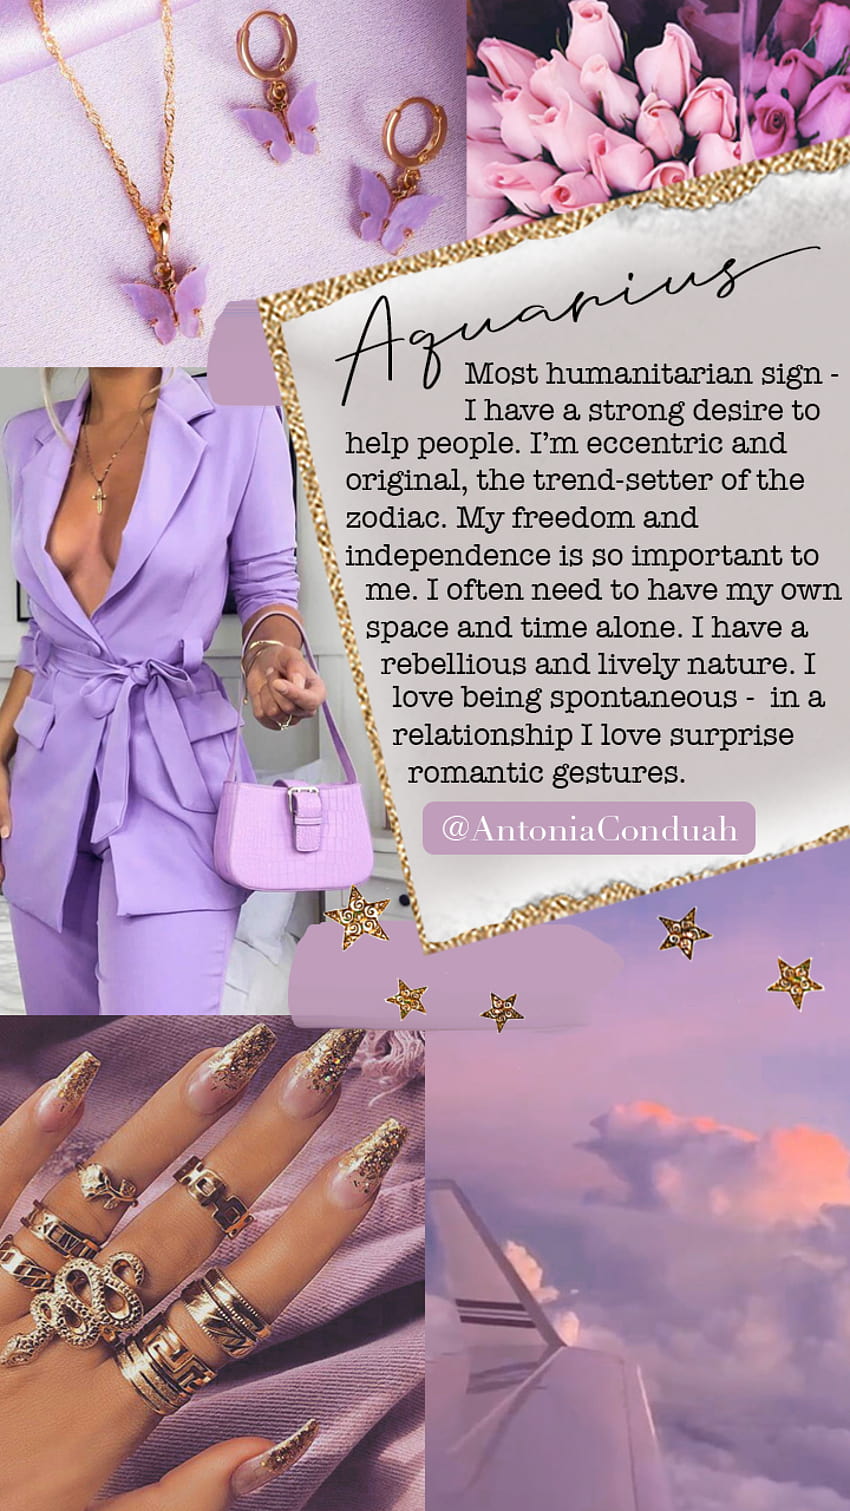 A collage of a woman wearing purple, a gold necklace, and a handbag. - Aquarius